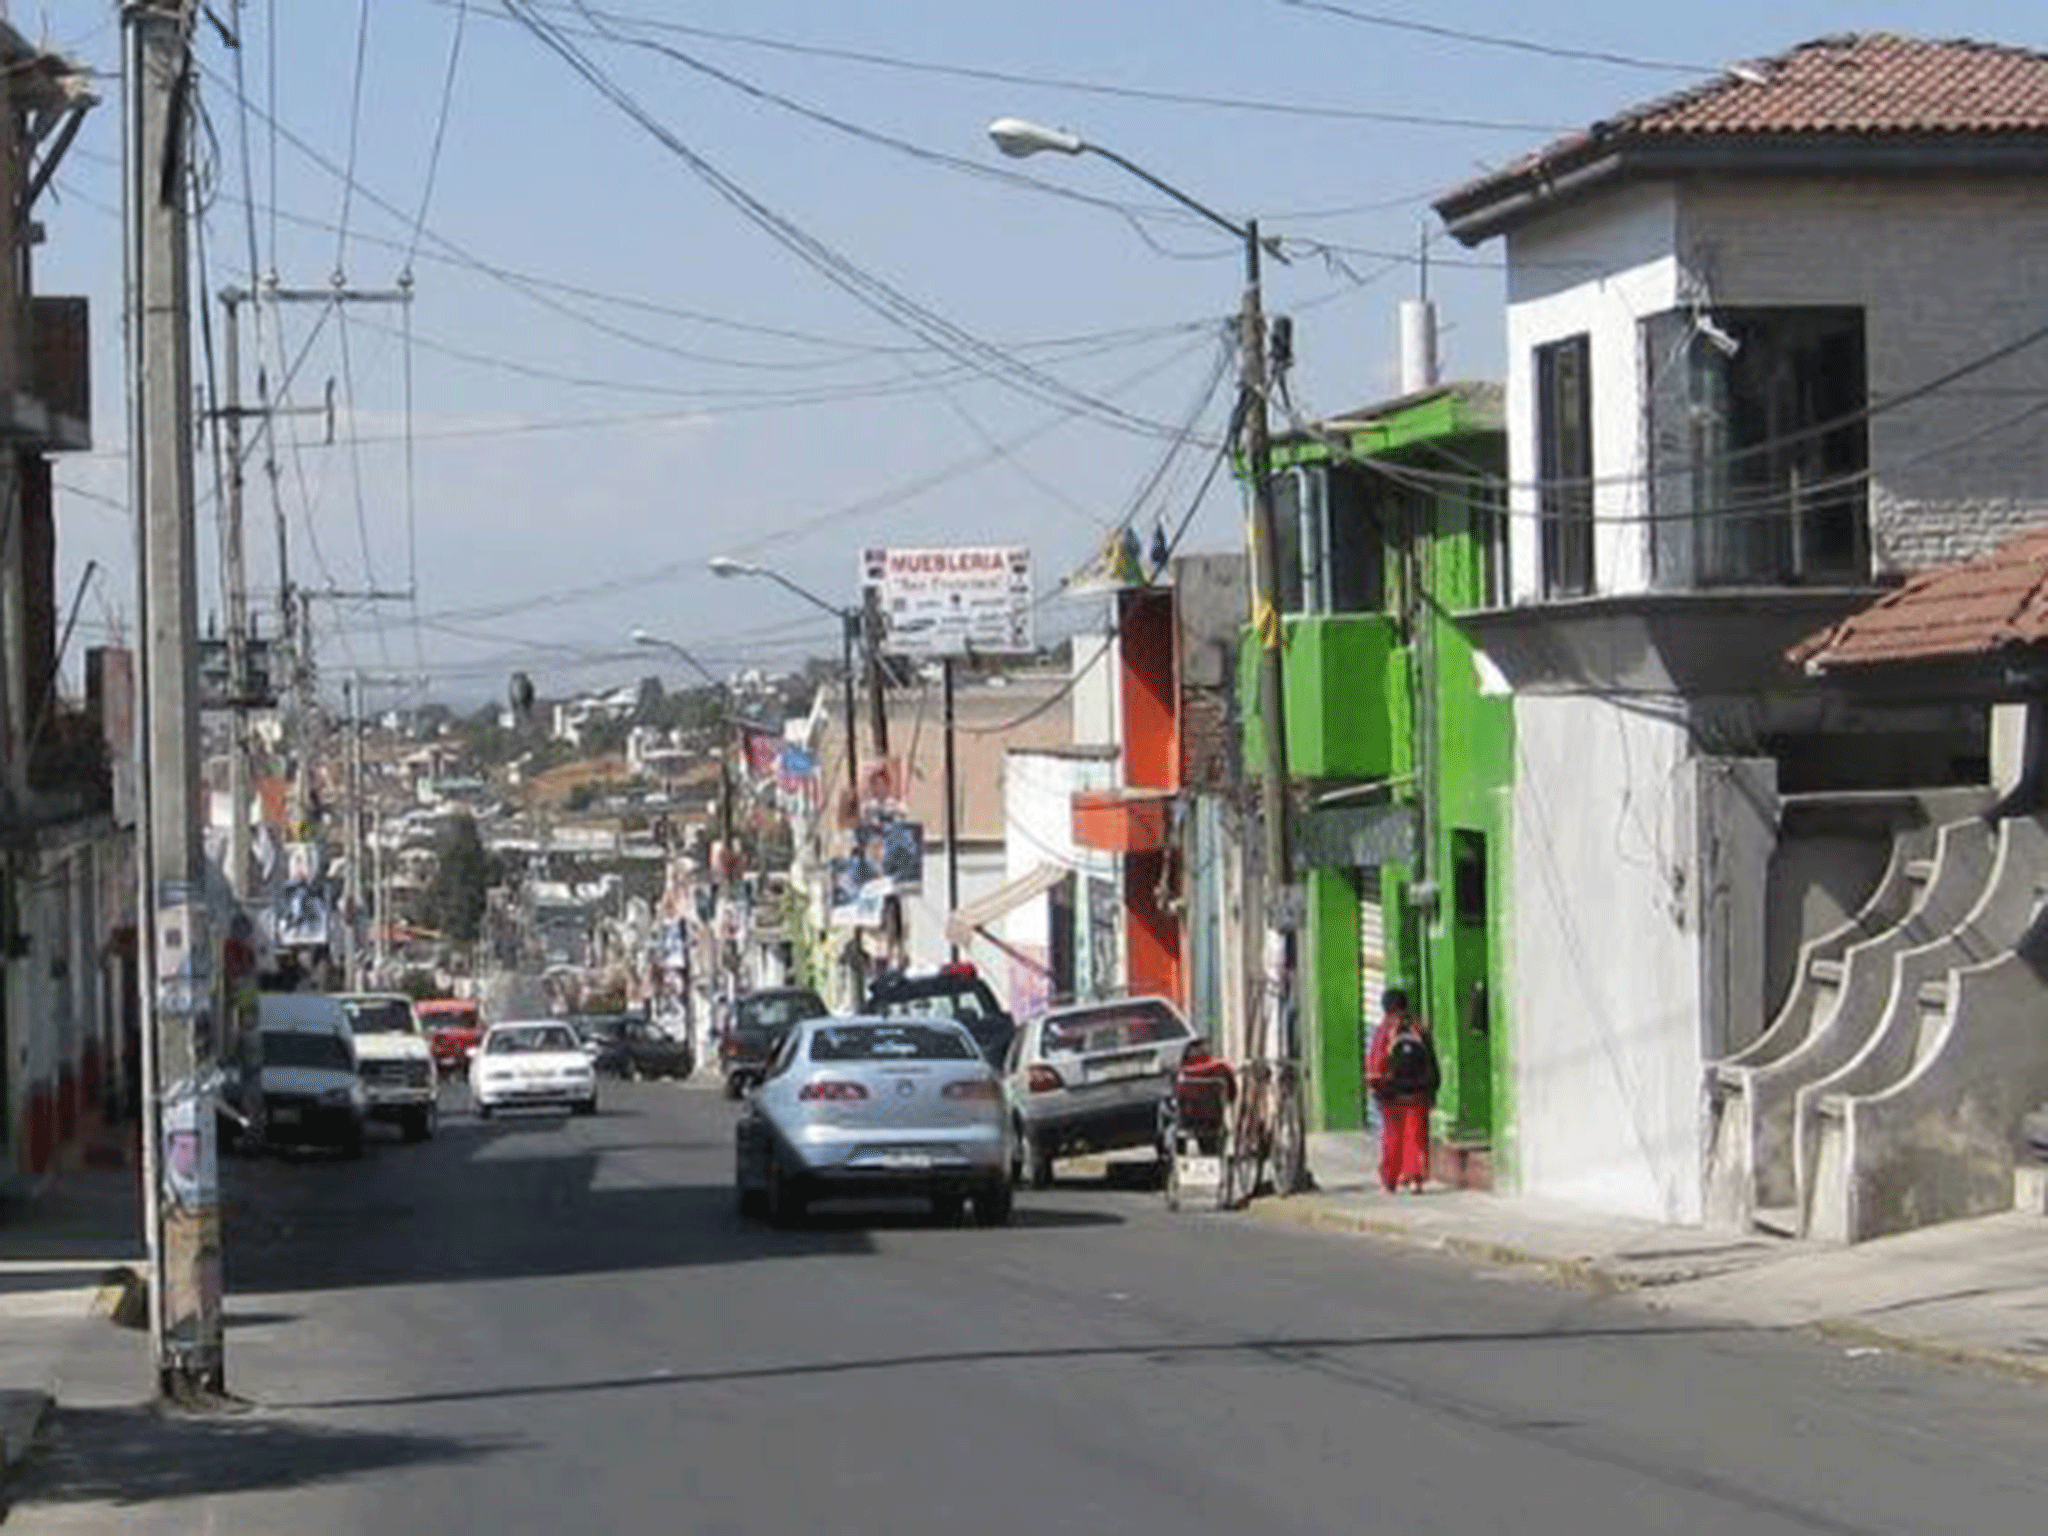 Tenancingo in Mexico is home to half of the sex traffickers most wanted by the US